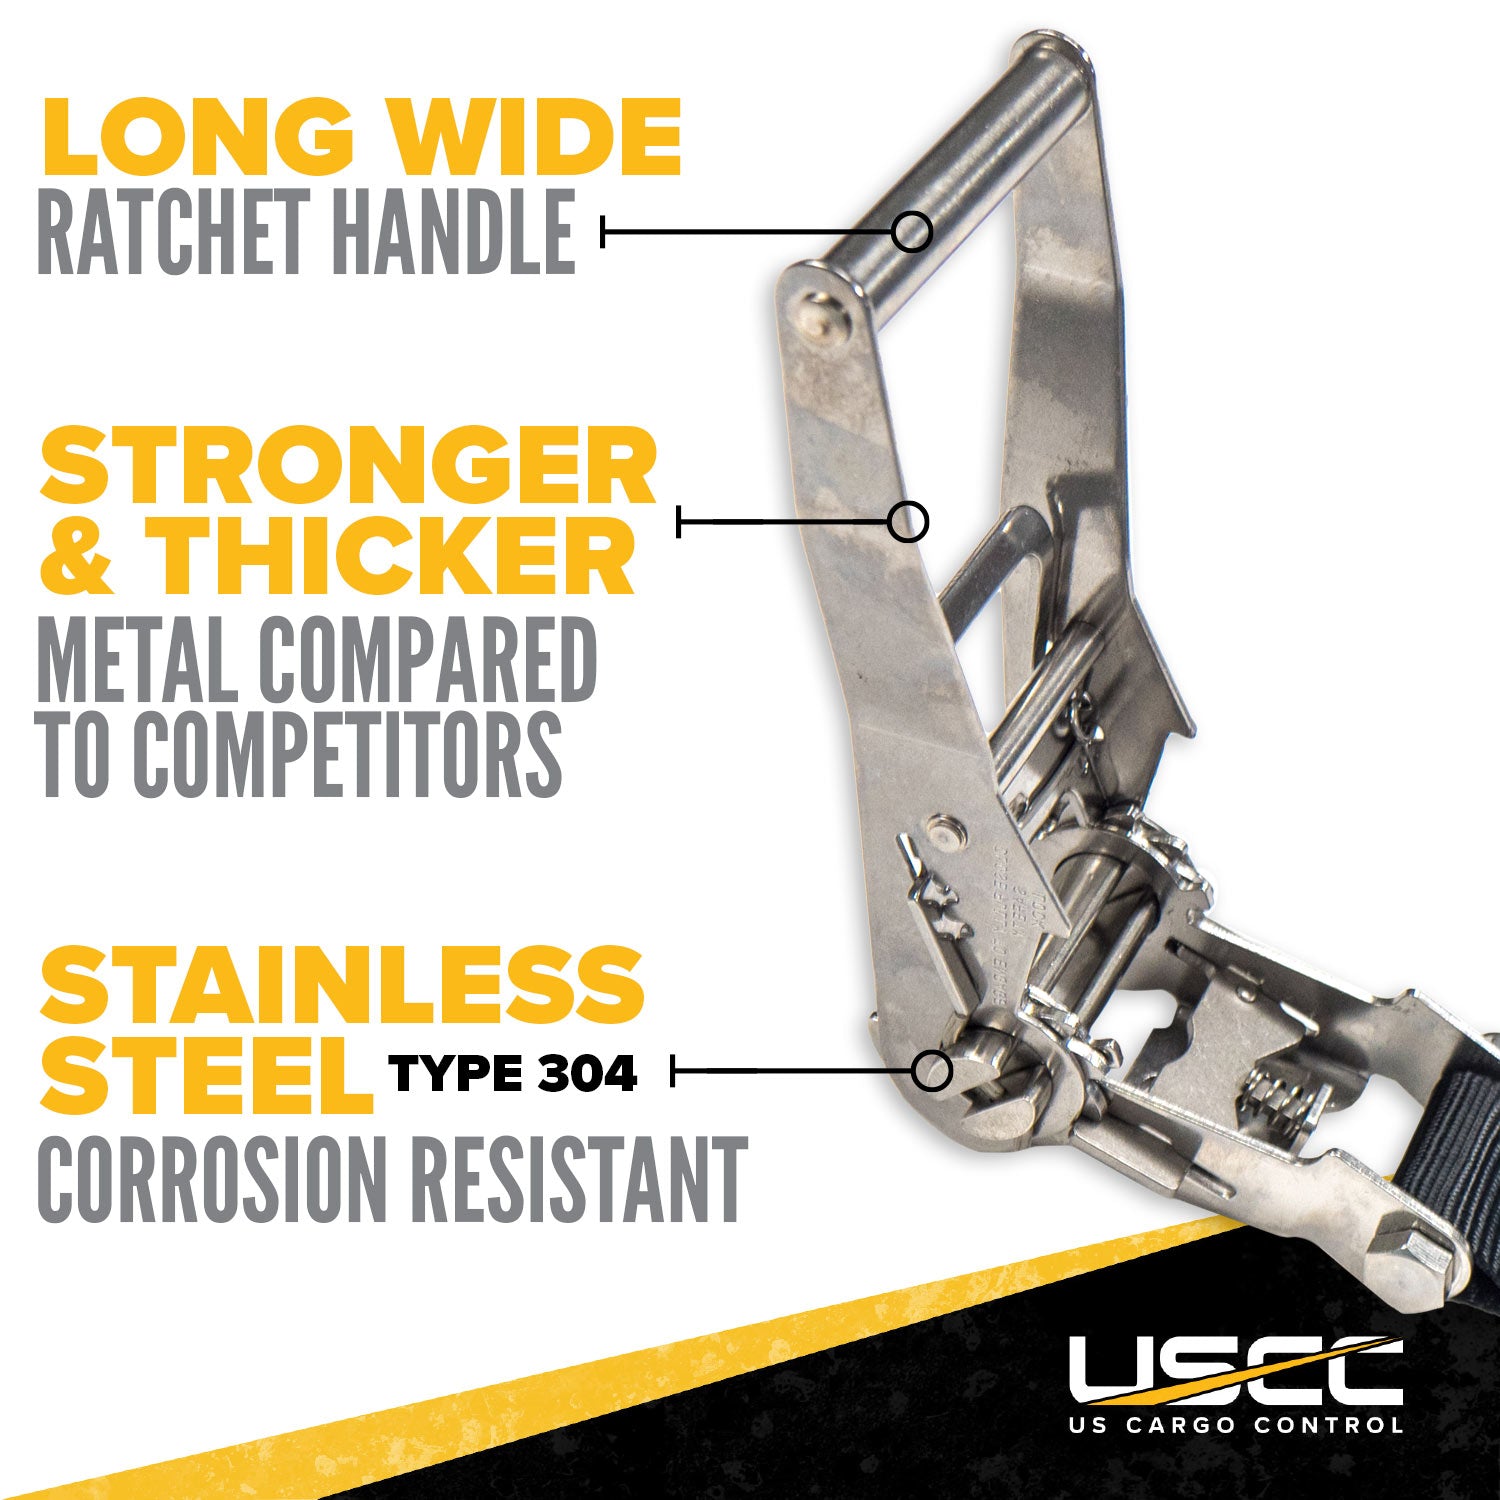 15' endless ratchet strap -  stainless steel ratchet is corrosion resistant